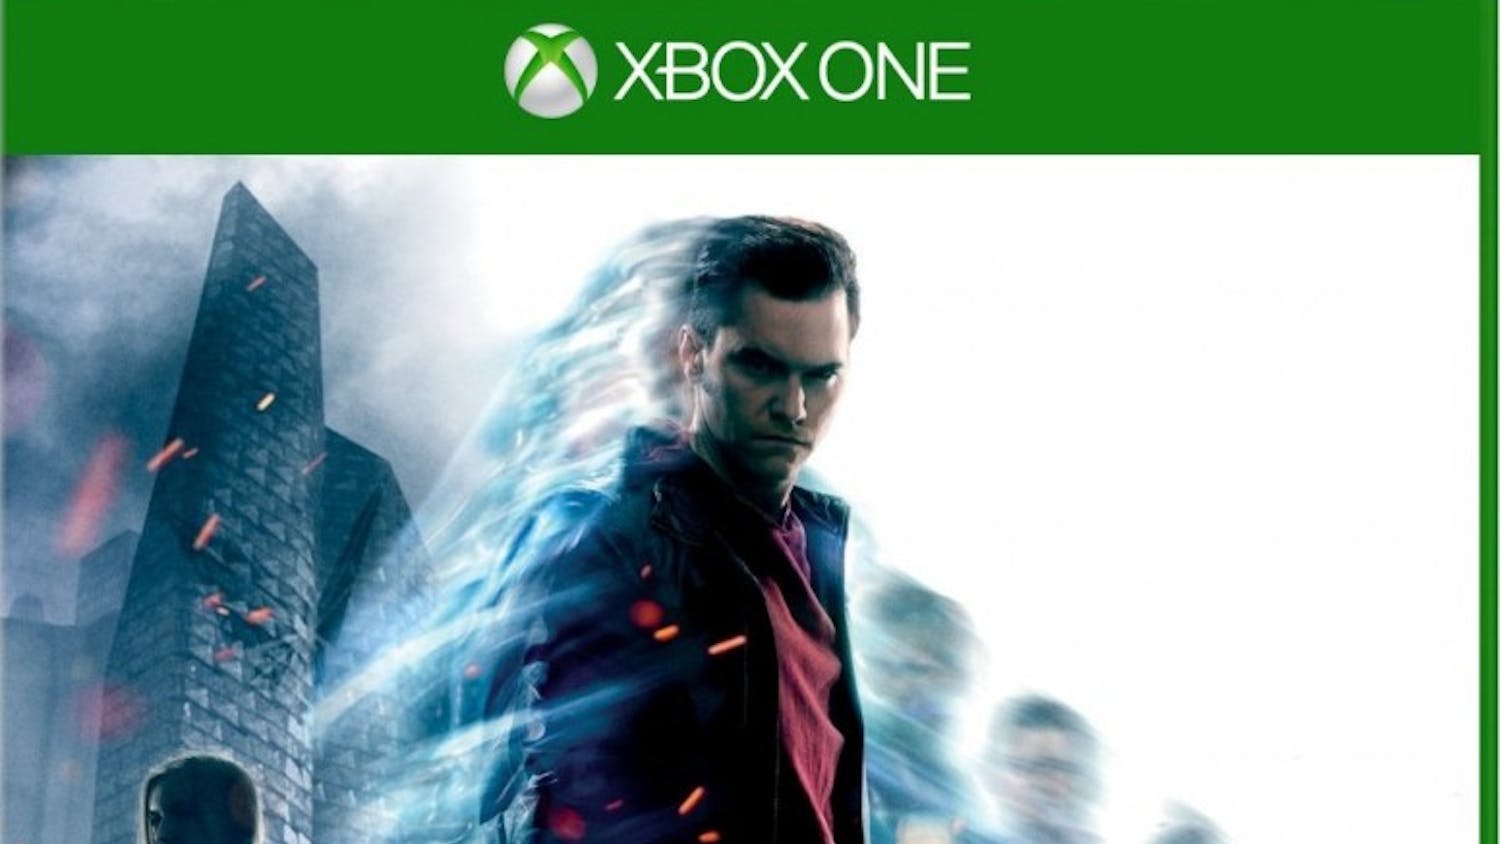 After you finish a mission in "Quantum Break," an episode of a TV show style series plays, with real actors and actresses, based on the choices you made in the game.